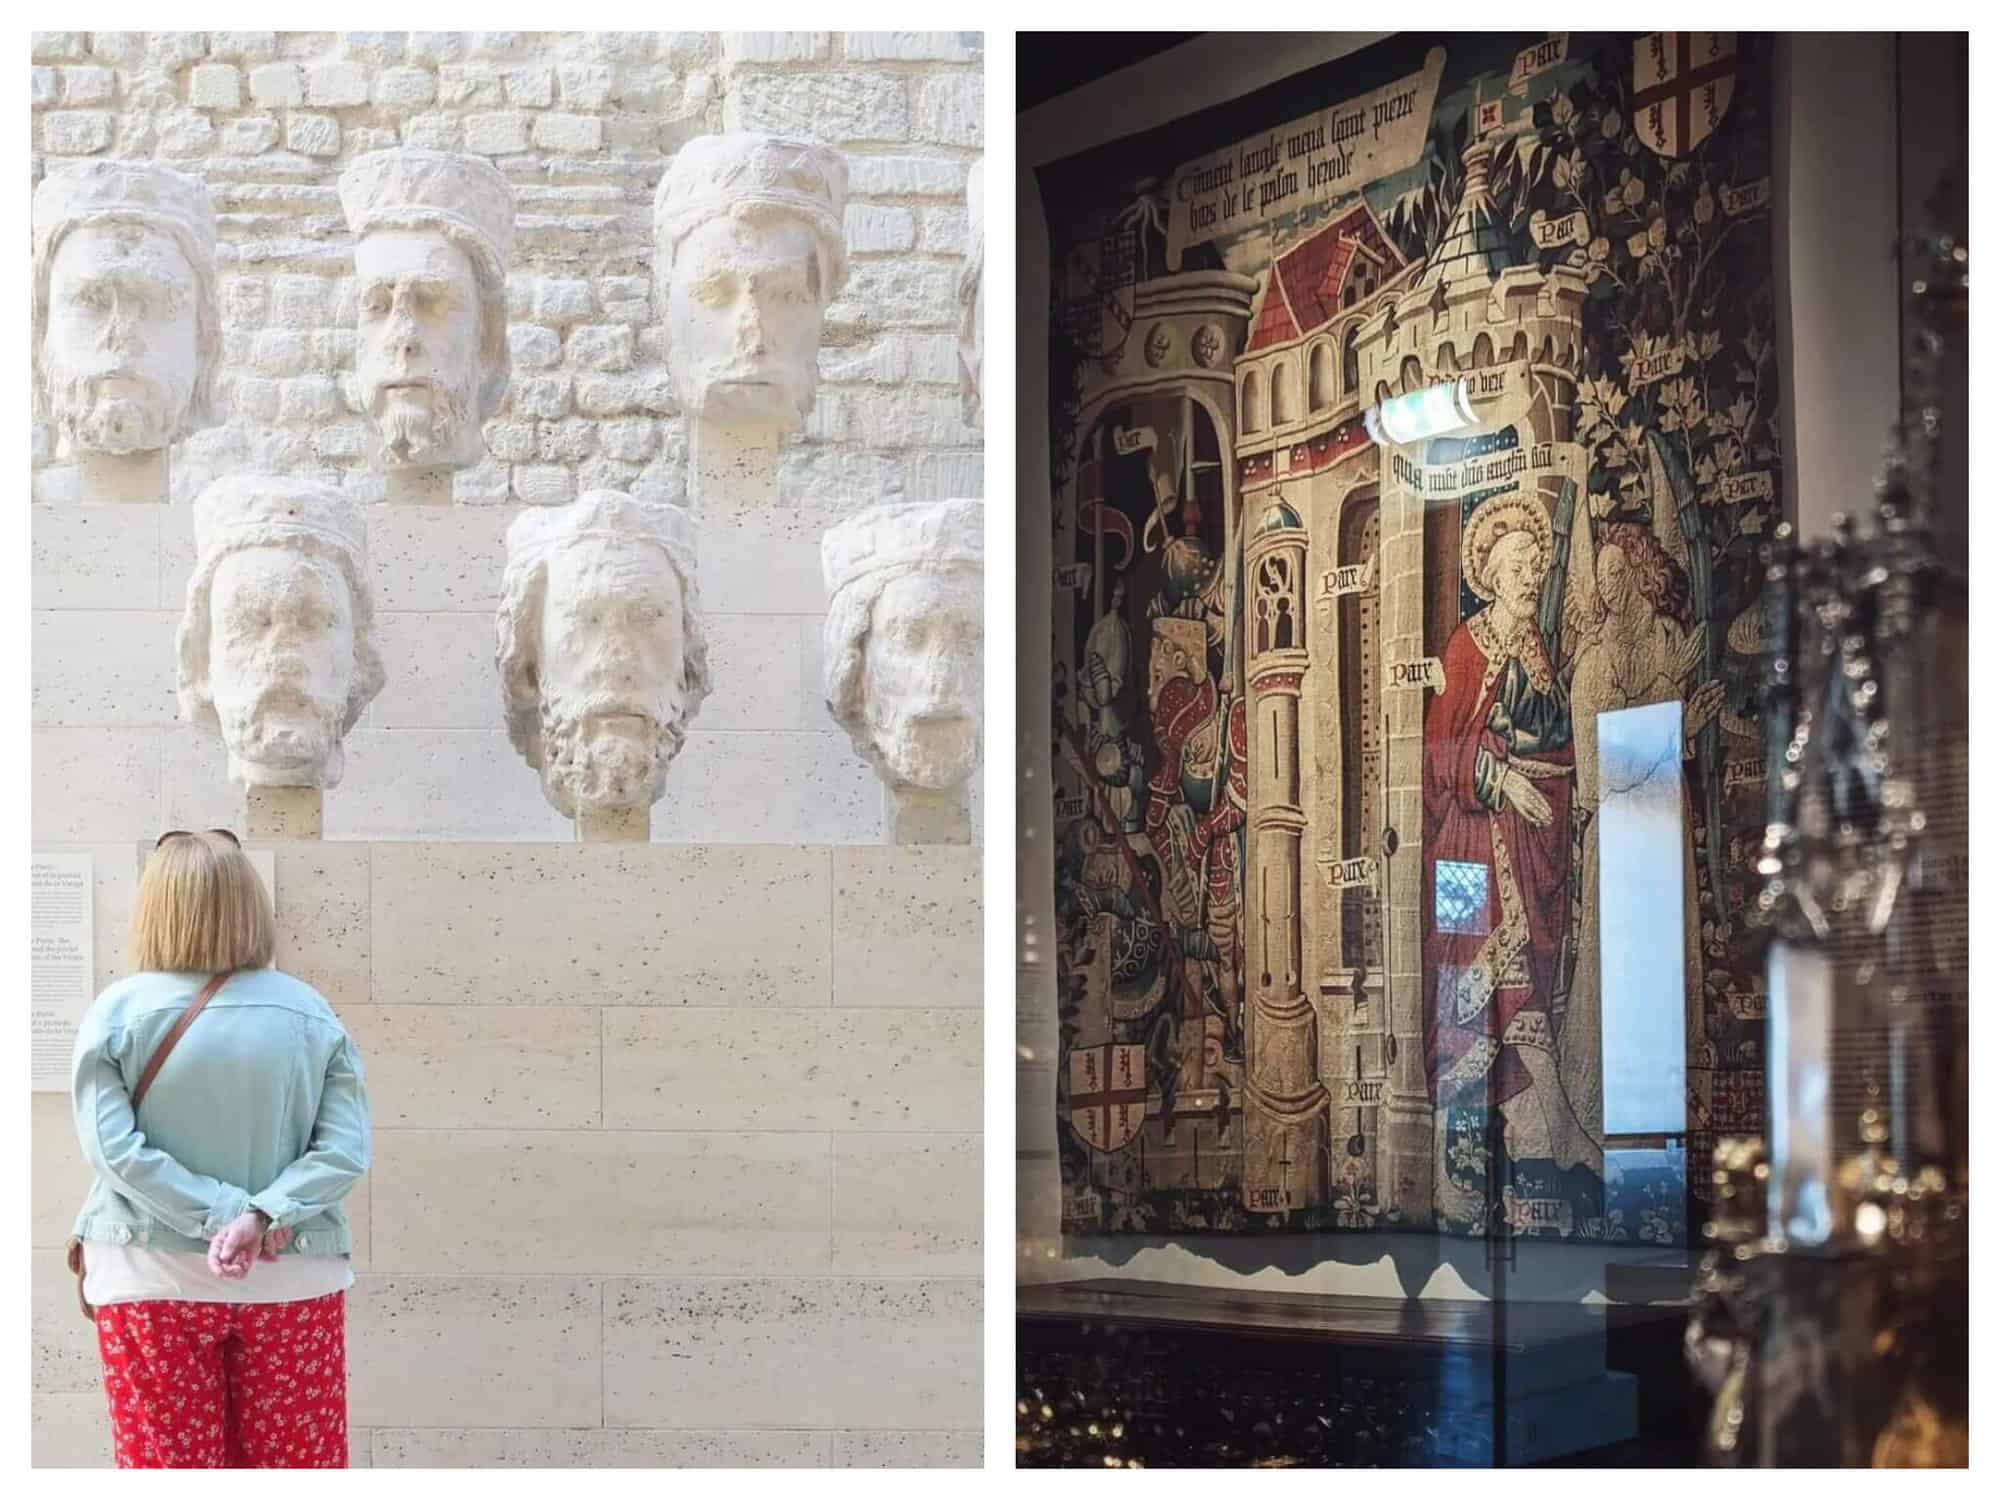 (Left) A blonde woman with a blue sweater and red pants stands in front of white stone medieval busts. / (Right) A medieval tapestry with red, yellow and green details. 